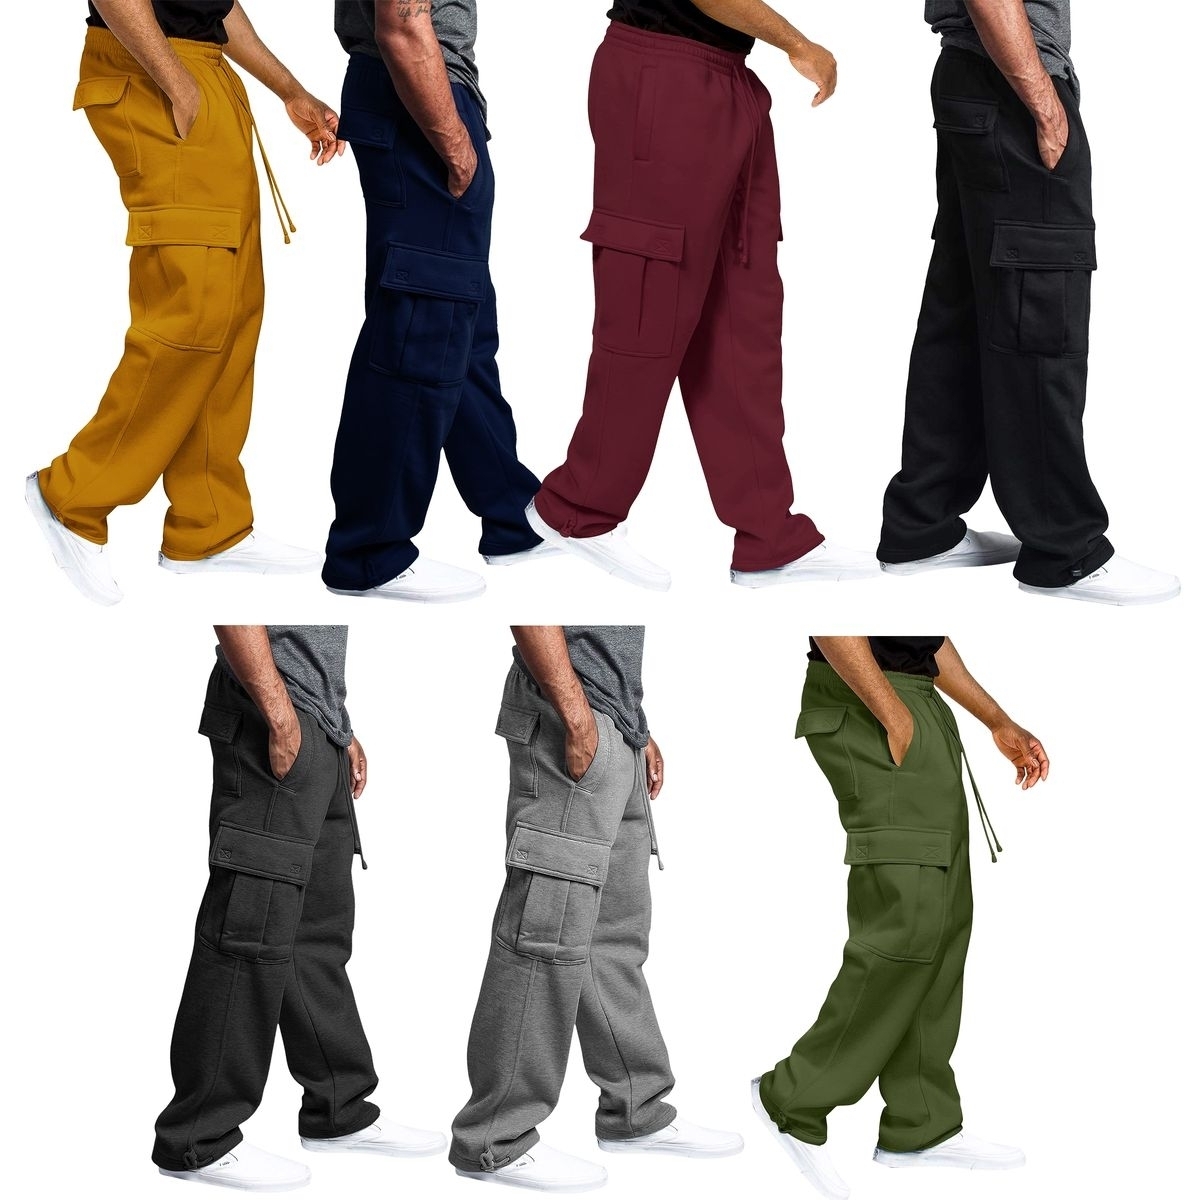 3-Pack: Men's Casual Solid Fleece Lined Cargo Jogger Sweatpants With Pockets - Xx-large